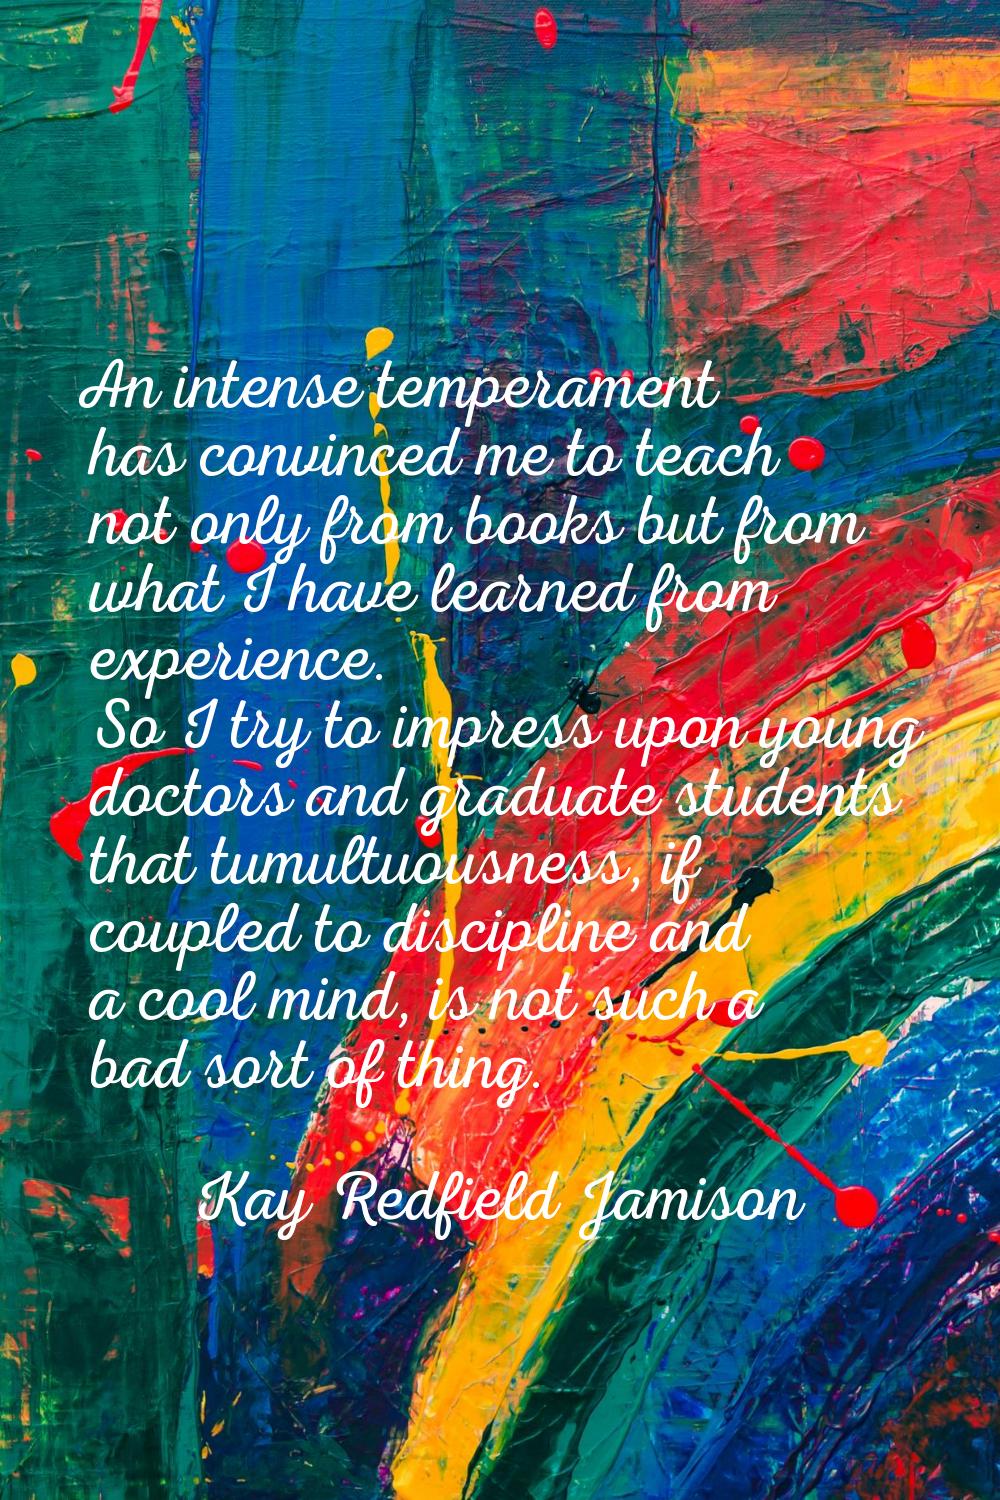 An intense temperament has convinced me to teach not only from books but from what I have learned f